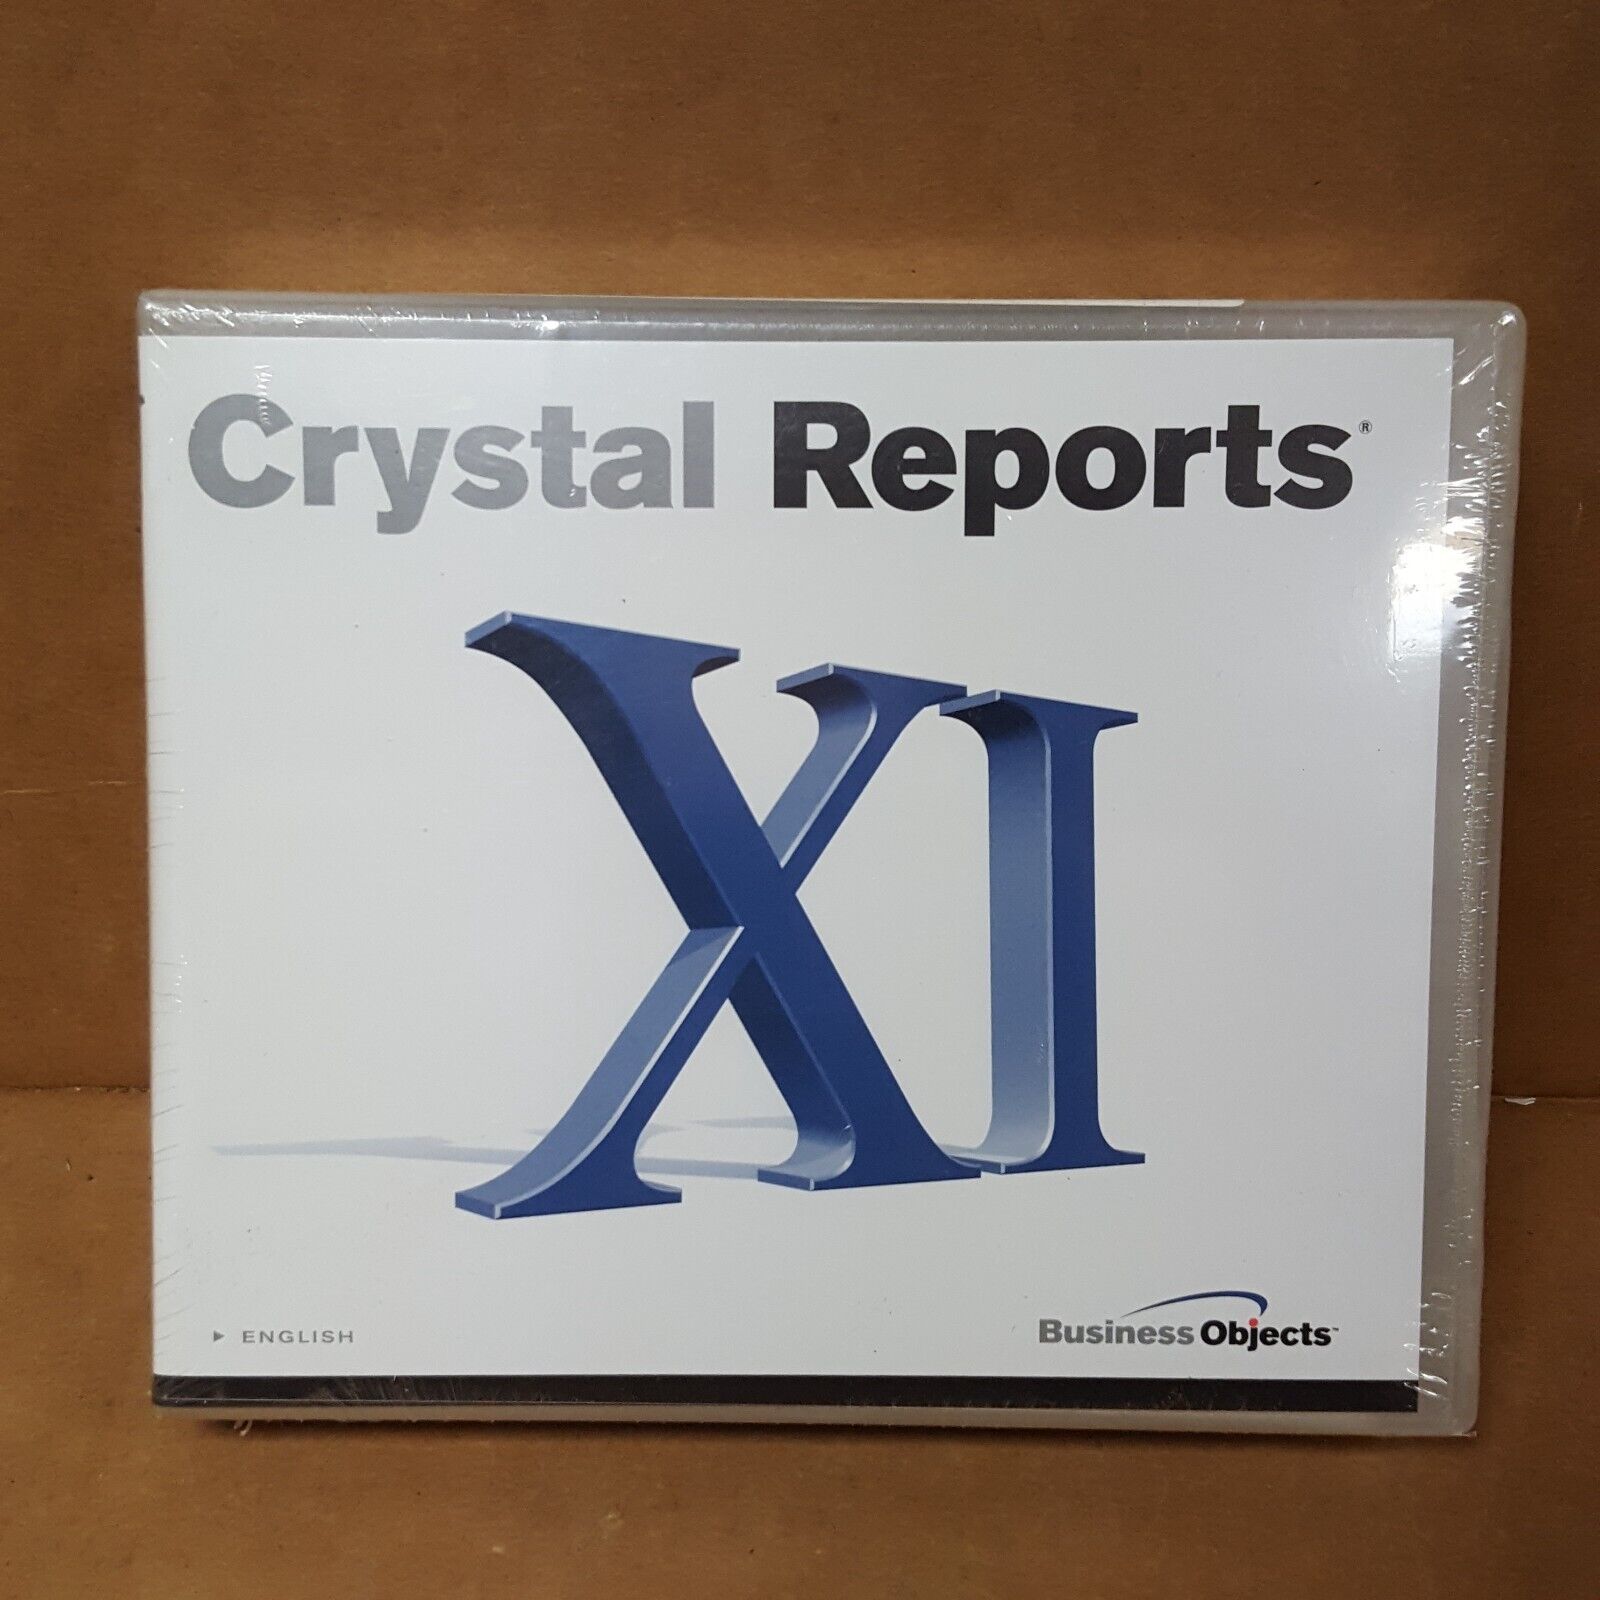 Crystal Reports XI  by Business Objects Y-1RD-E-WX-00 - English - NEW SEALED